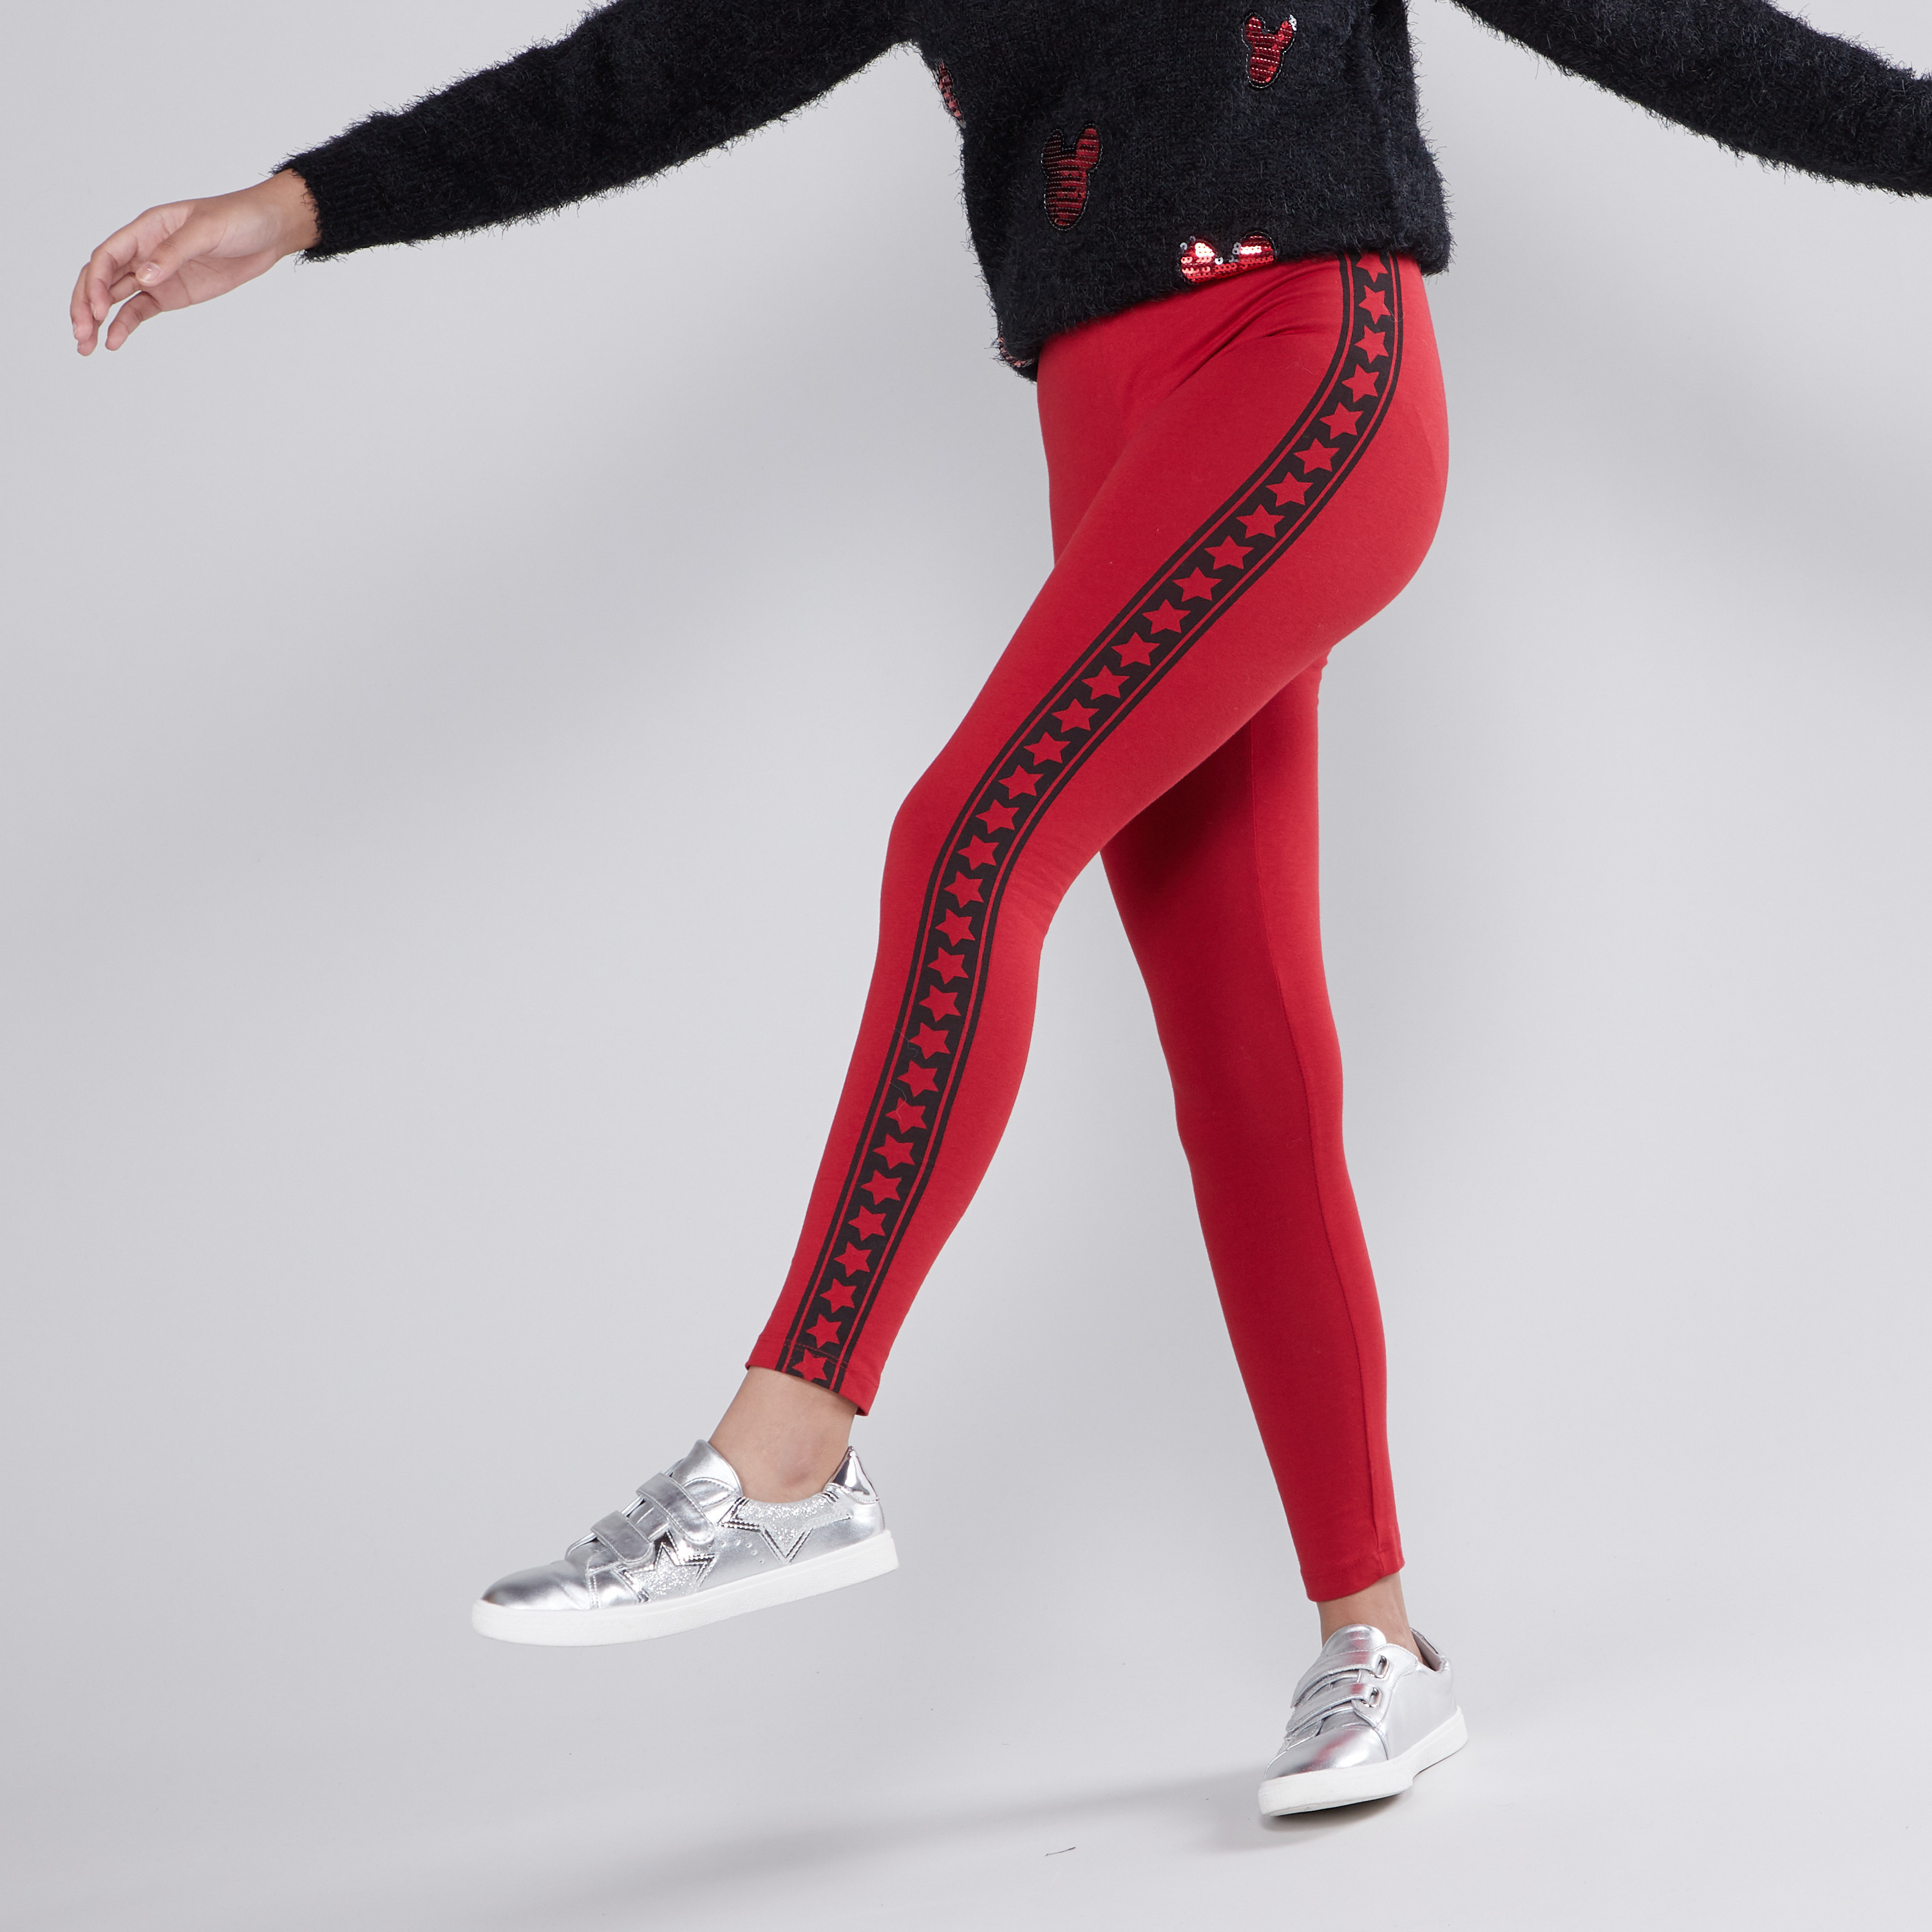 Black High Waist Bow Printed Leggings For Women Sexy Push Up Activewear For  Workout And Stretch Leisure 211204 From Long01, $10.7 | DHgate.Com